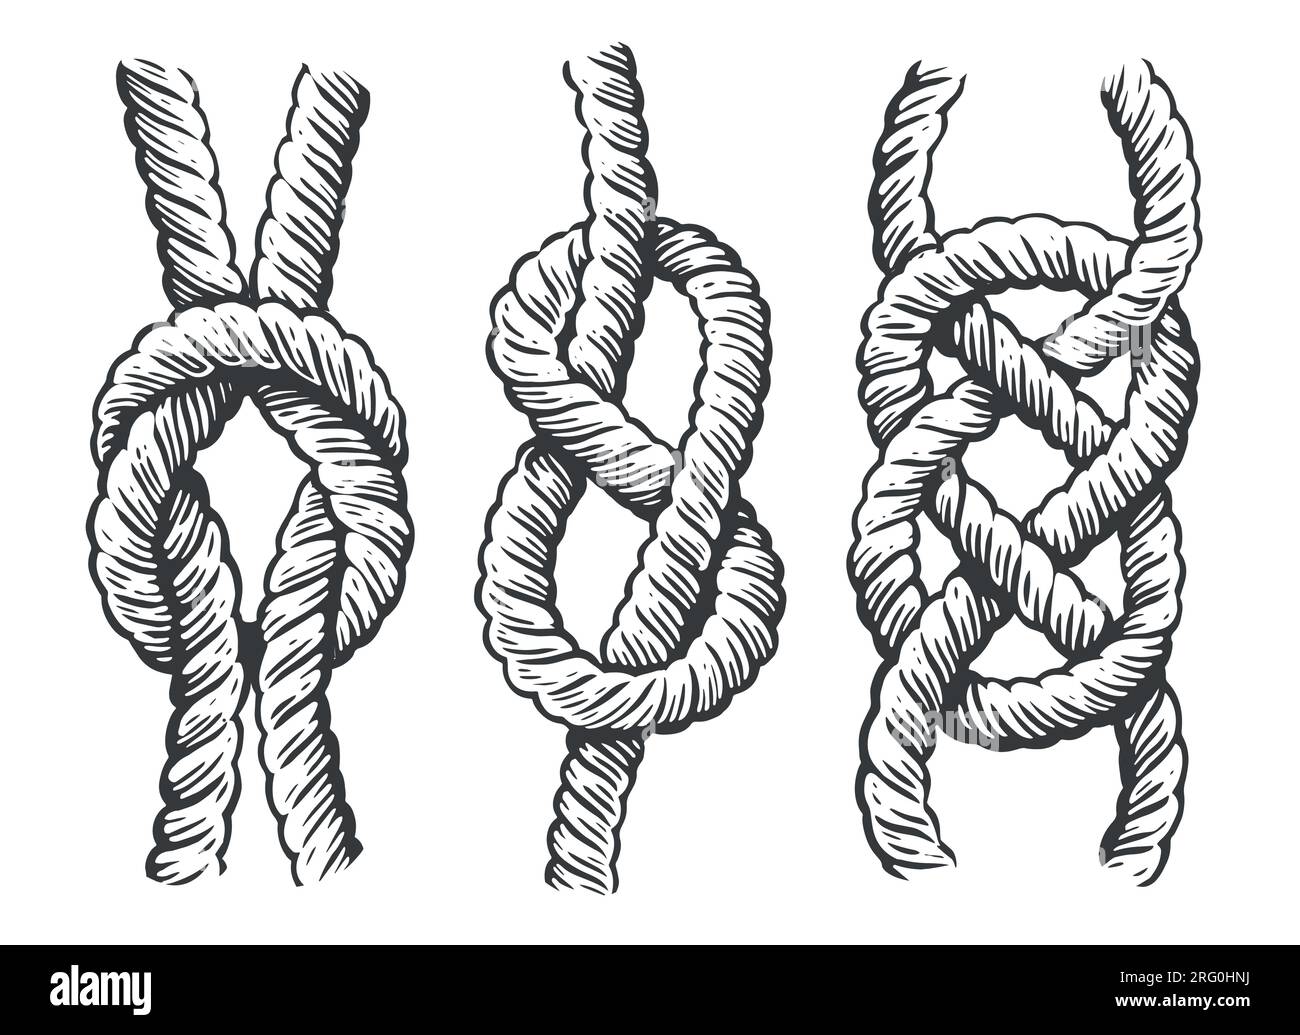 Nautical rope knots set. Marine concept sketch. Vintage vector illustration in engraving style Stock Vector